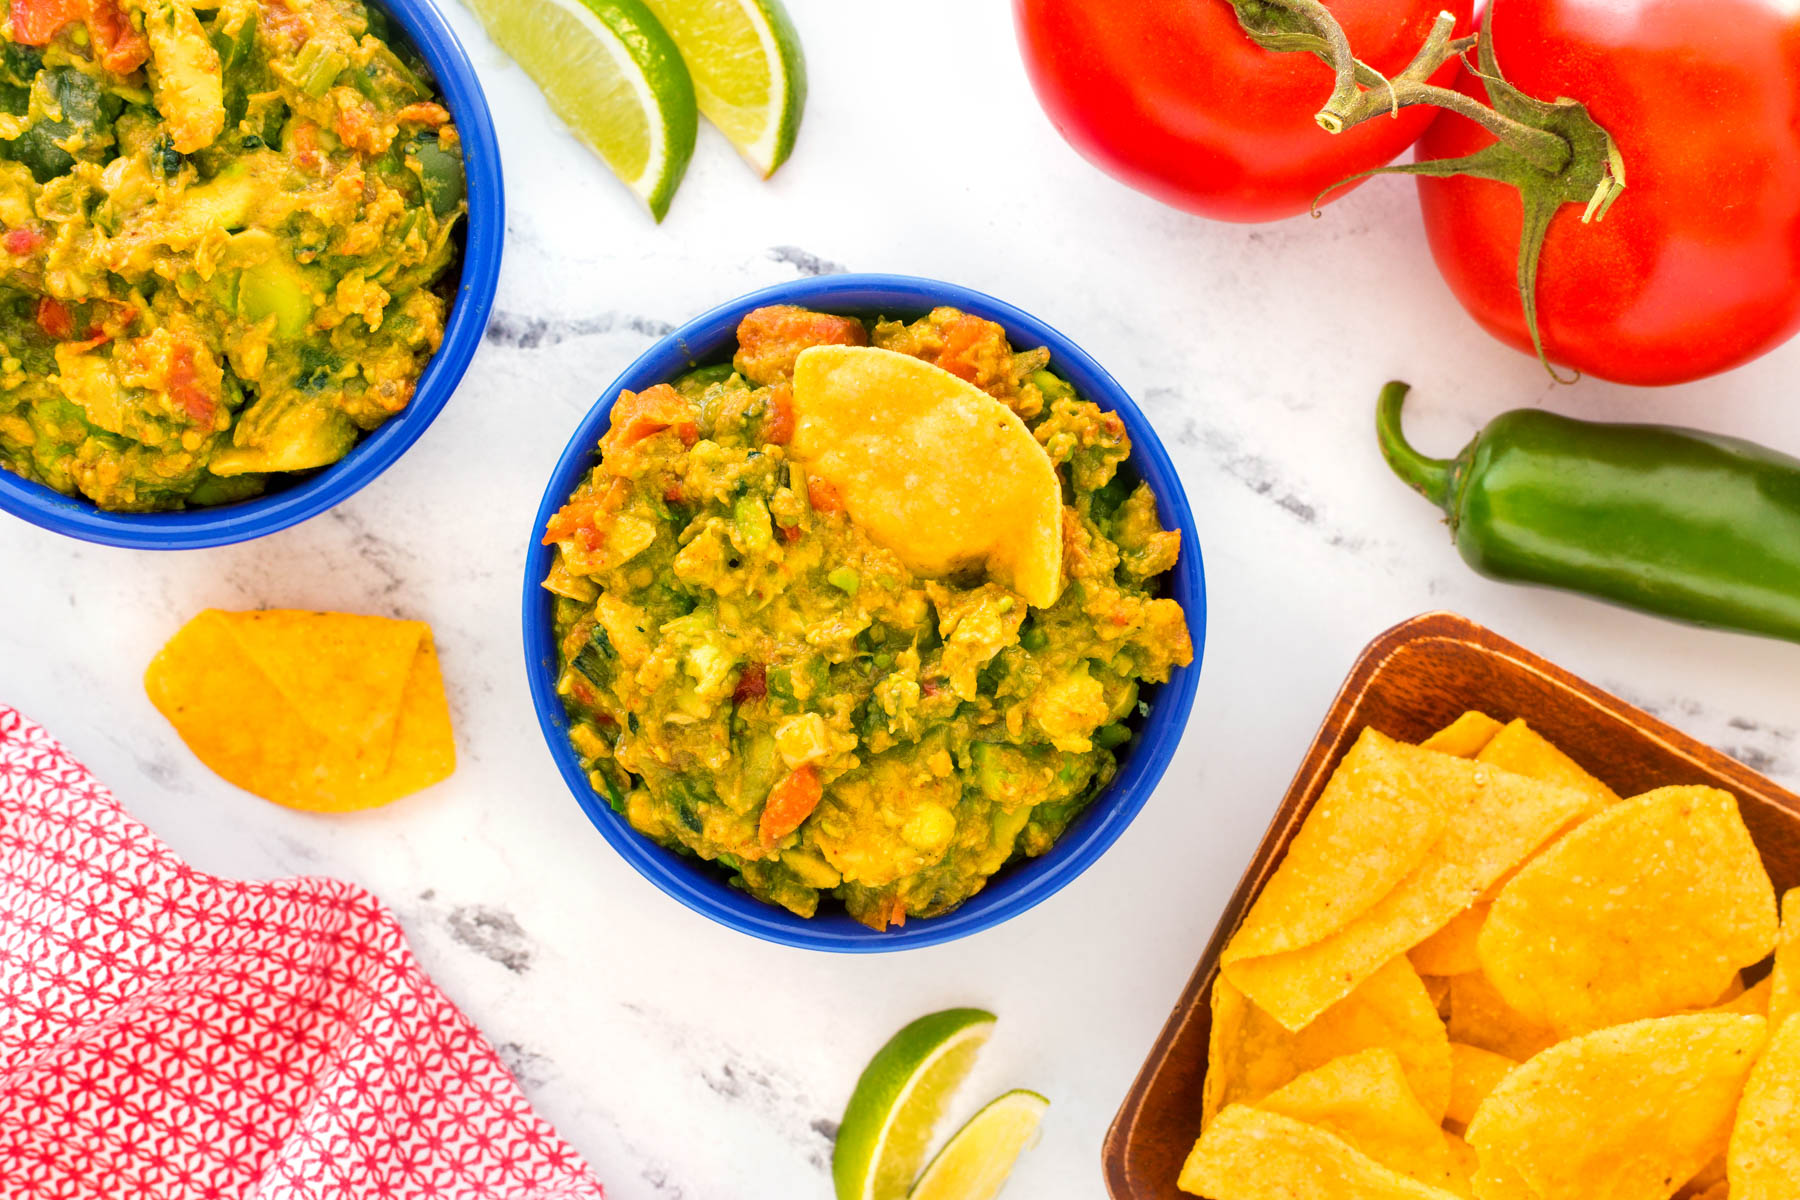 Grilled guacamole in a small blue serving bowl with tortilla chips, lime wedges, whole jalapenos and tomatoes around the bowl